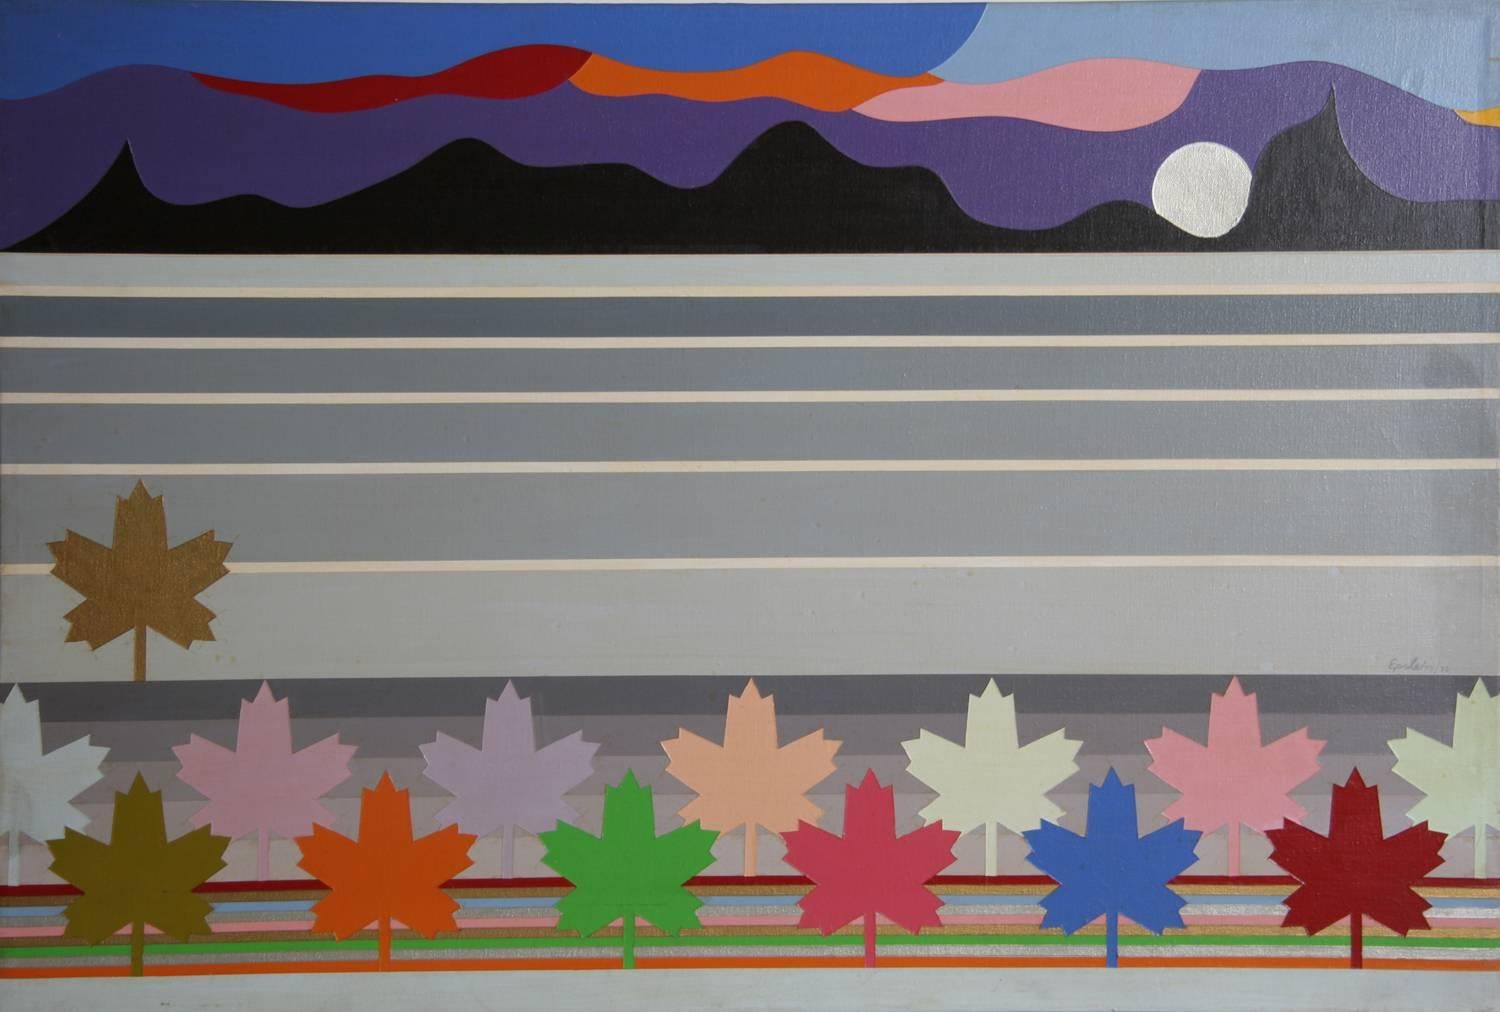 Max Epstein, "Canadian Landscape, " Oil on Canvas, 1976